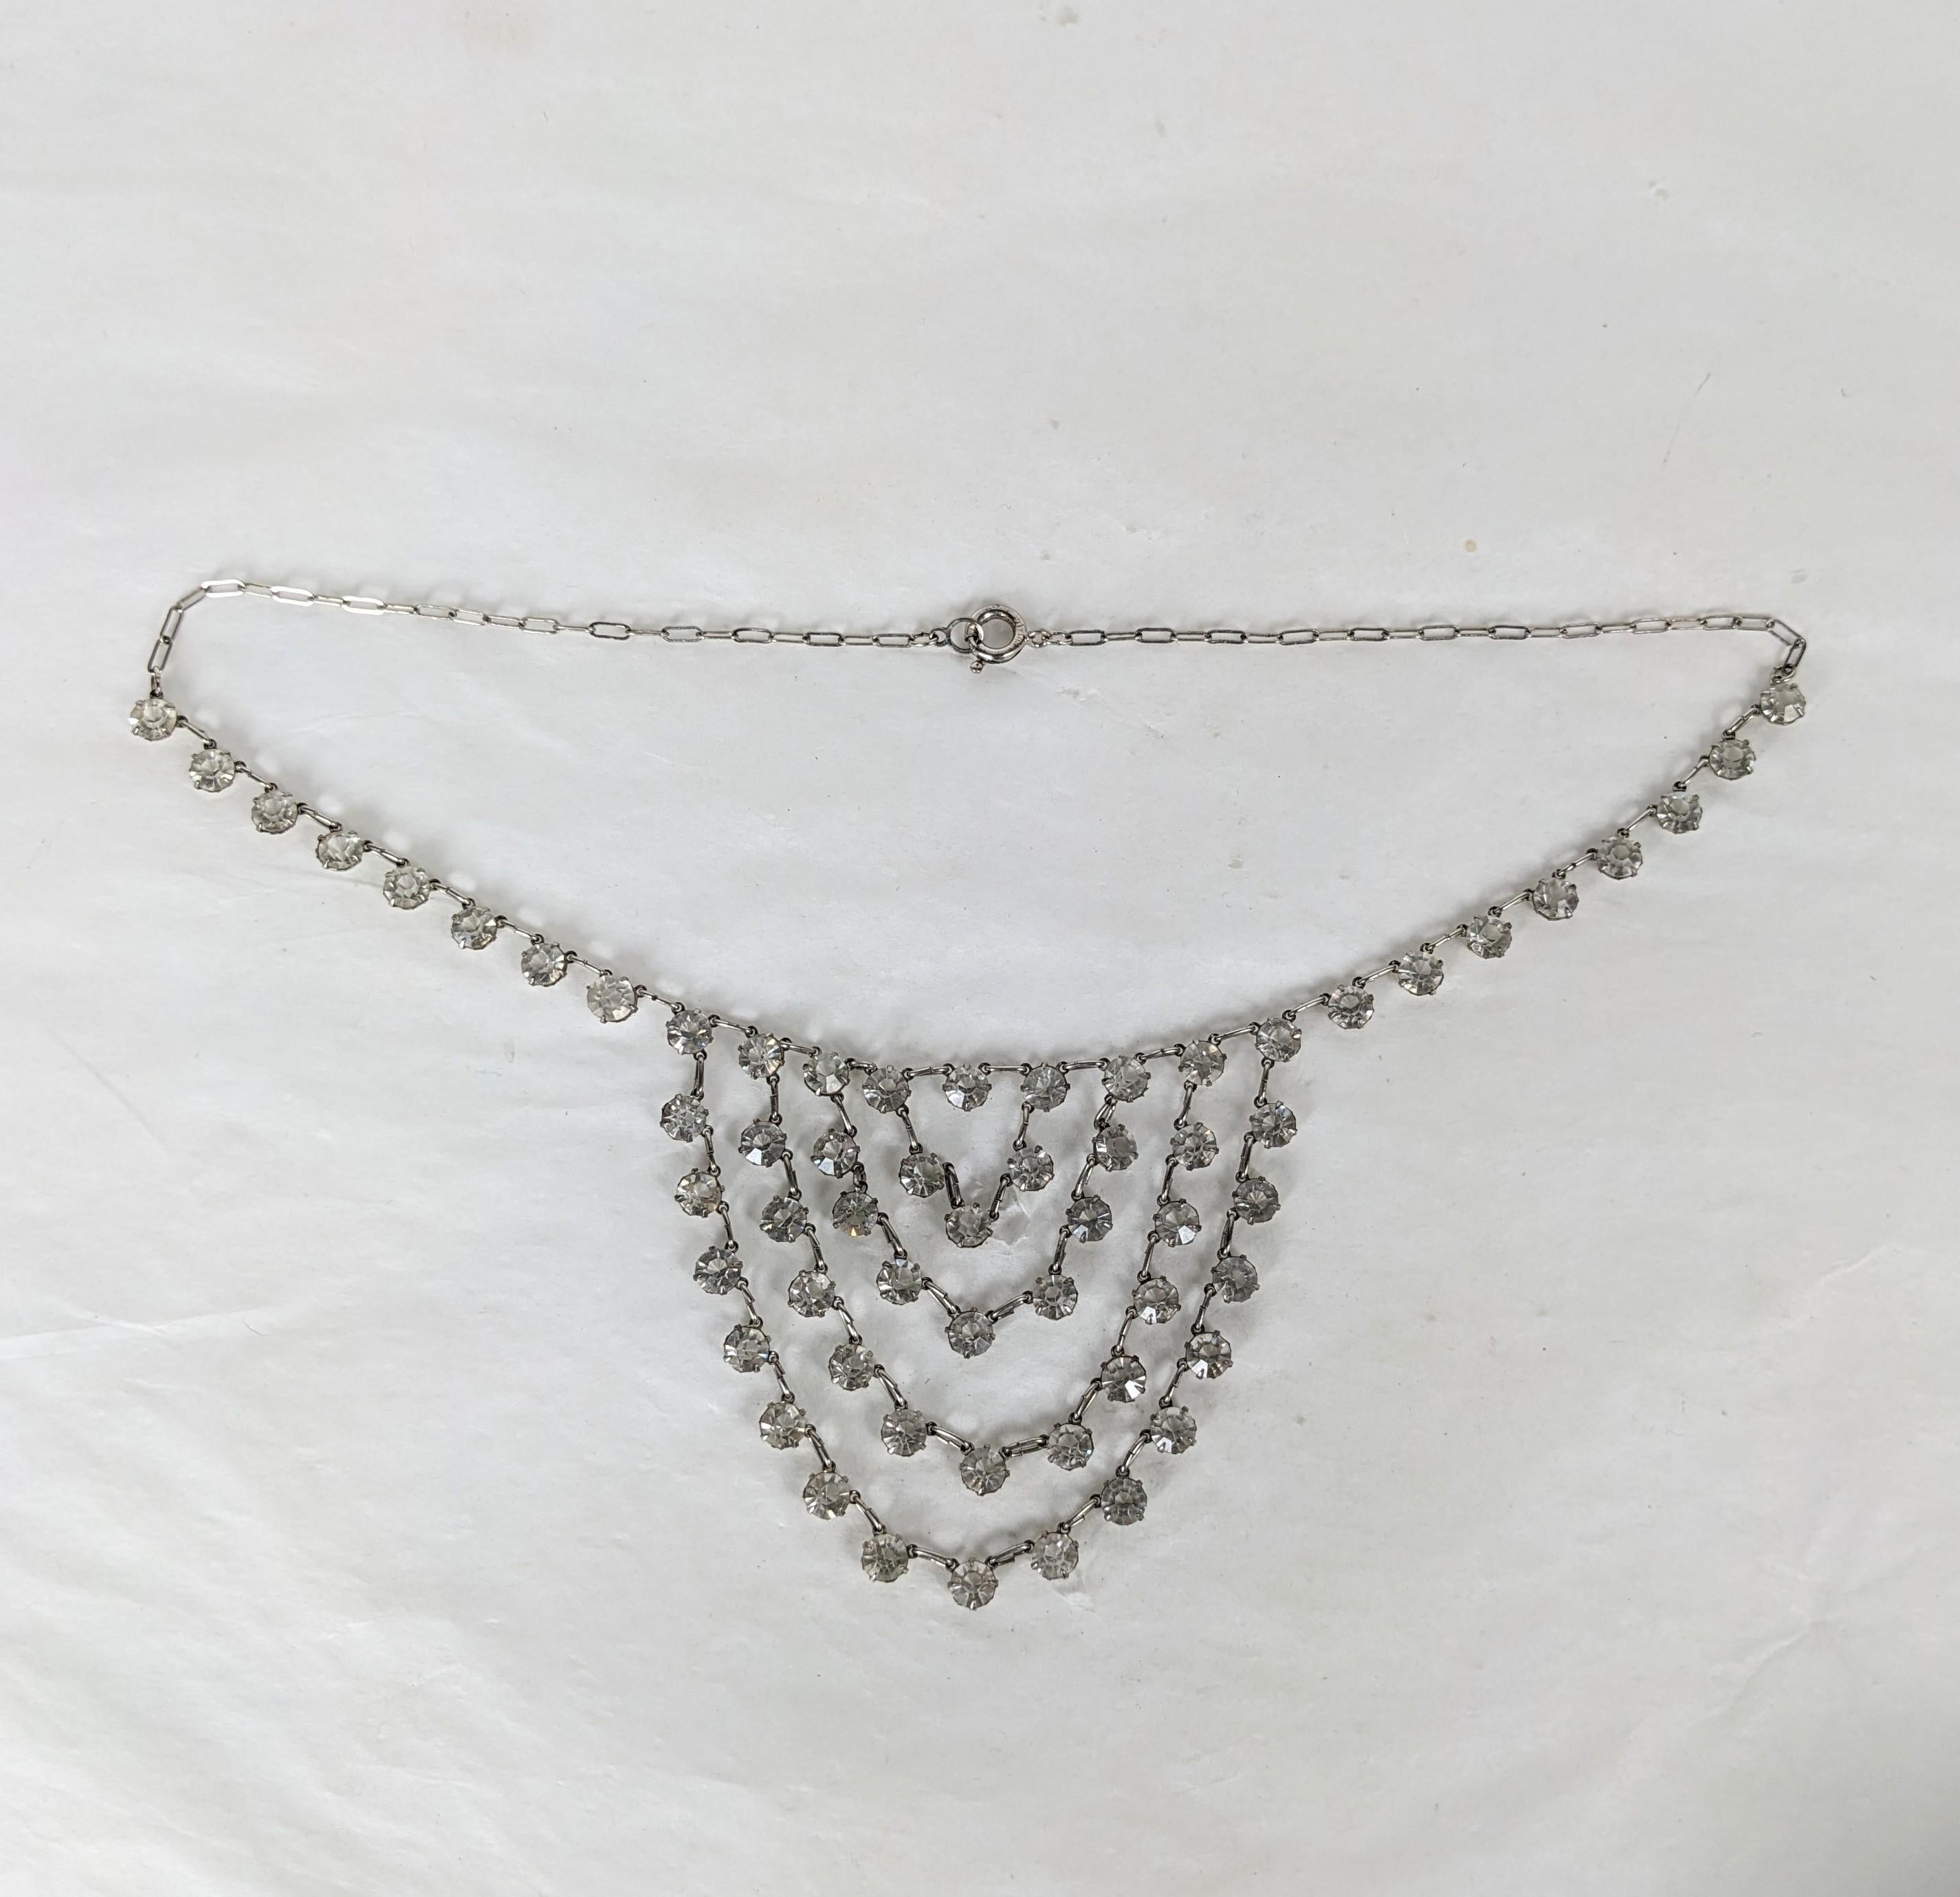 Elegant Art Deco Draped Crystal Paste Necklace from the 1920's set in sterling. 16